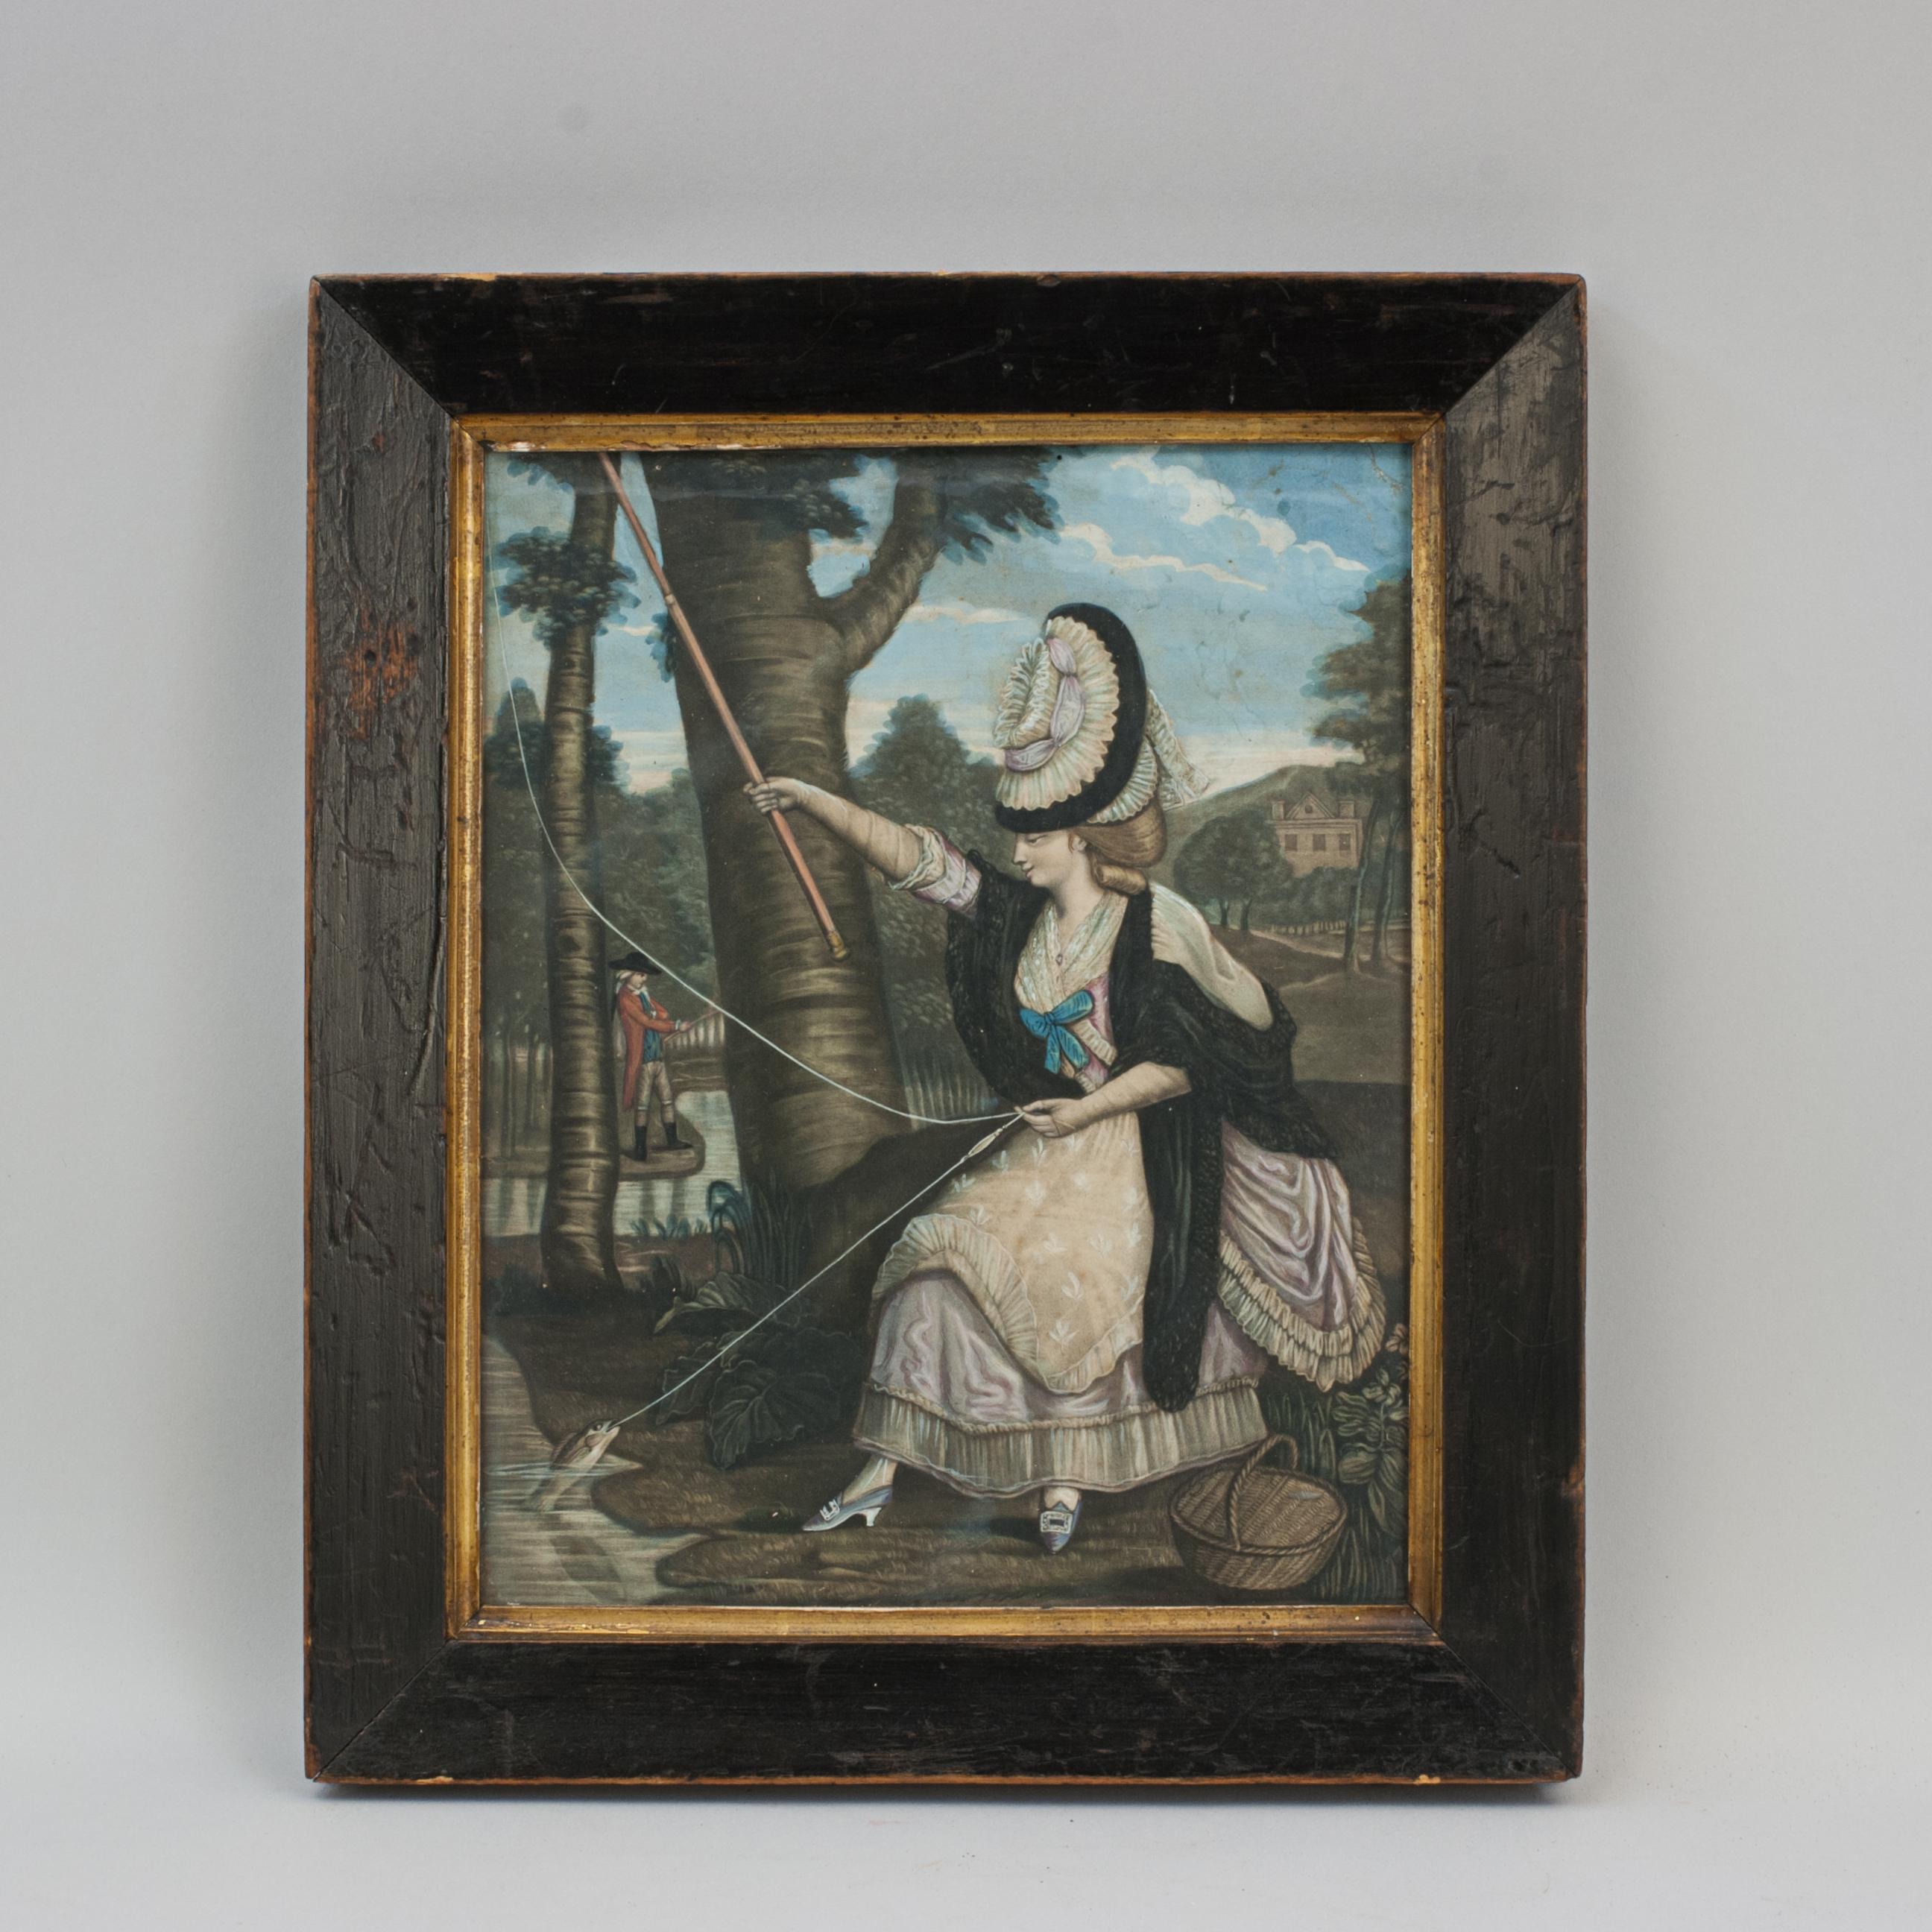 Early 18th Century Fishing Picture, Lady Fly Fishing
A rare 18th century fly fishing picture, made even more rare by the subject matter of a female angler. She has caught a fish and is pulling it into the bank. A wicker creel is by her feet ready to